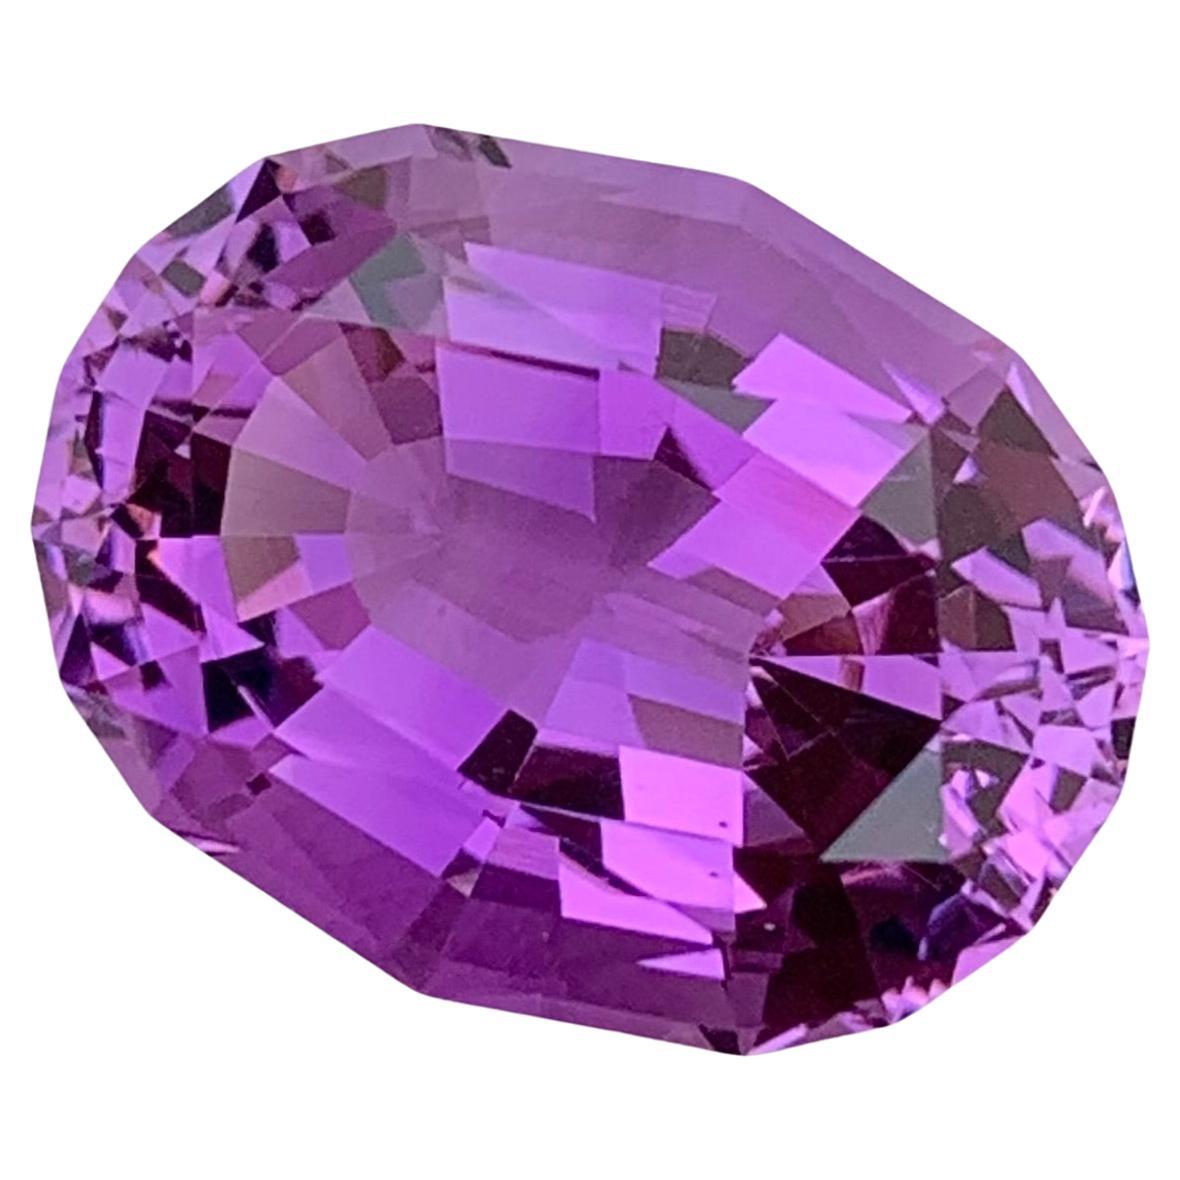 Loose Amethyst
Weight: 18.20 Carats
Dimension: 19.7 x 15.1 x 11 Mm
Colour: Purple
Origin: Brazil
Treatment: Non
Certificate: On Demand
Shape: Oval 

Amethyst, a stunning variety of quartz known for its mesmerizing purple hue, has captivated humans